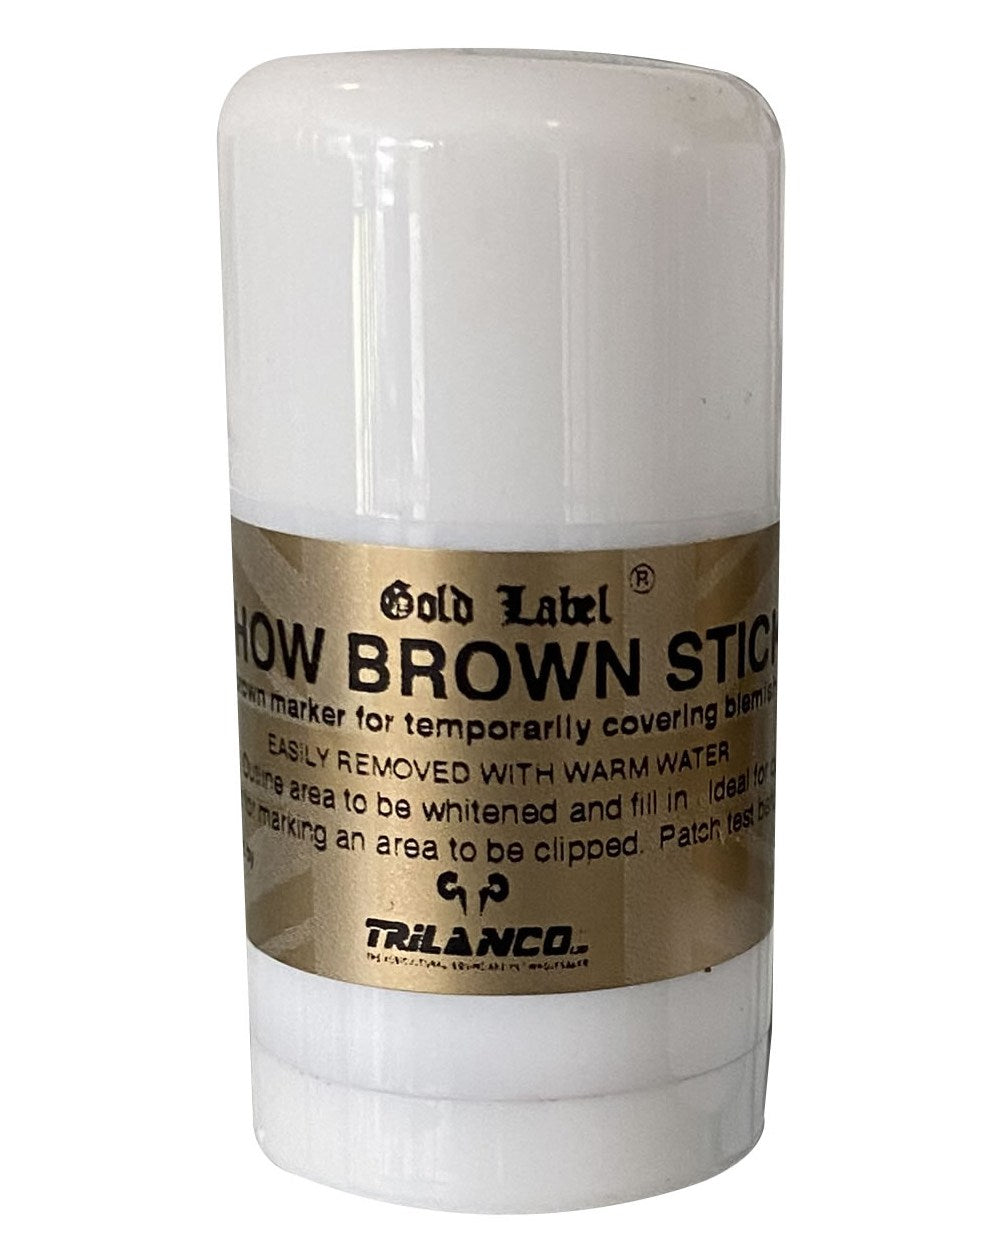 Gold Label Show Brown Stick On A White Background